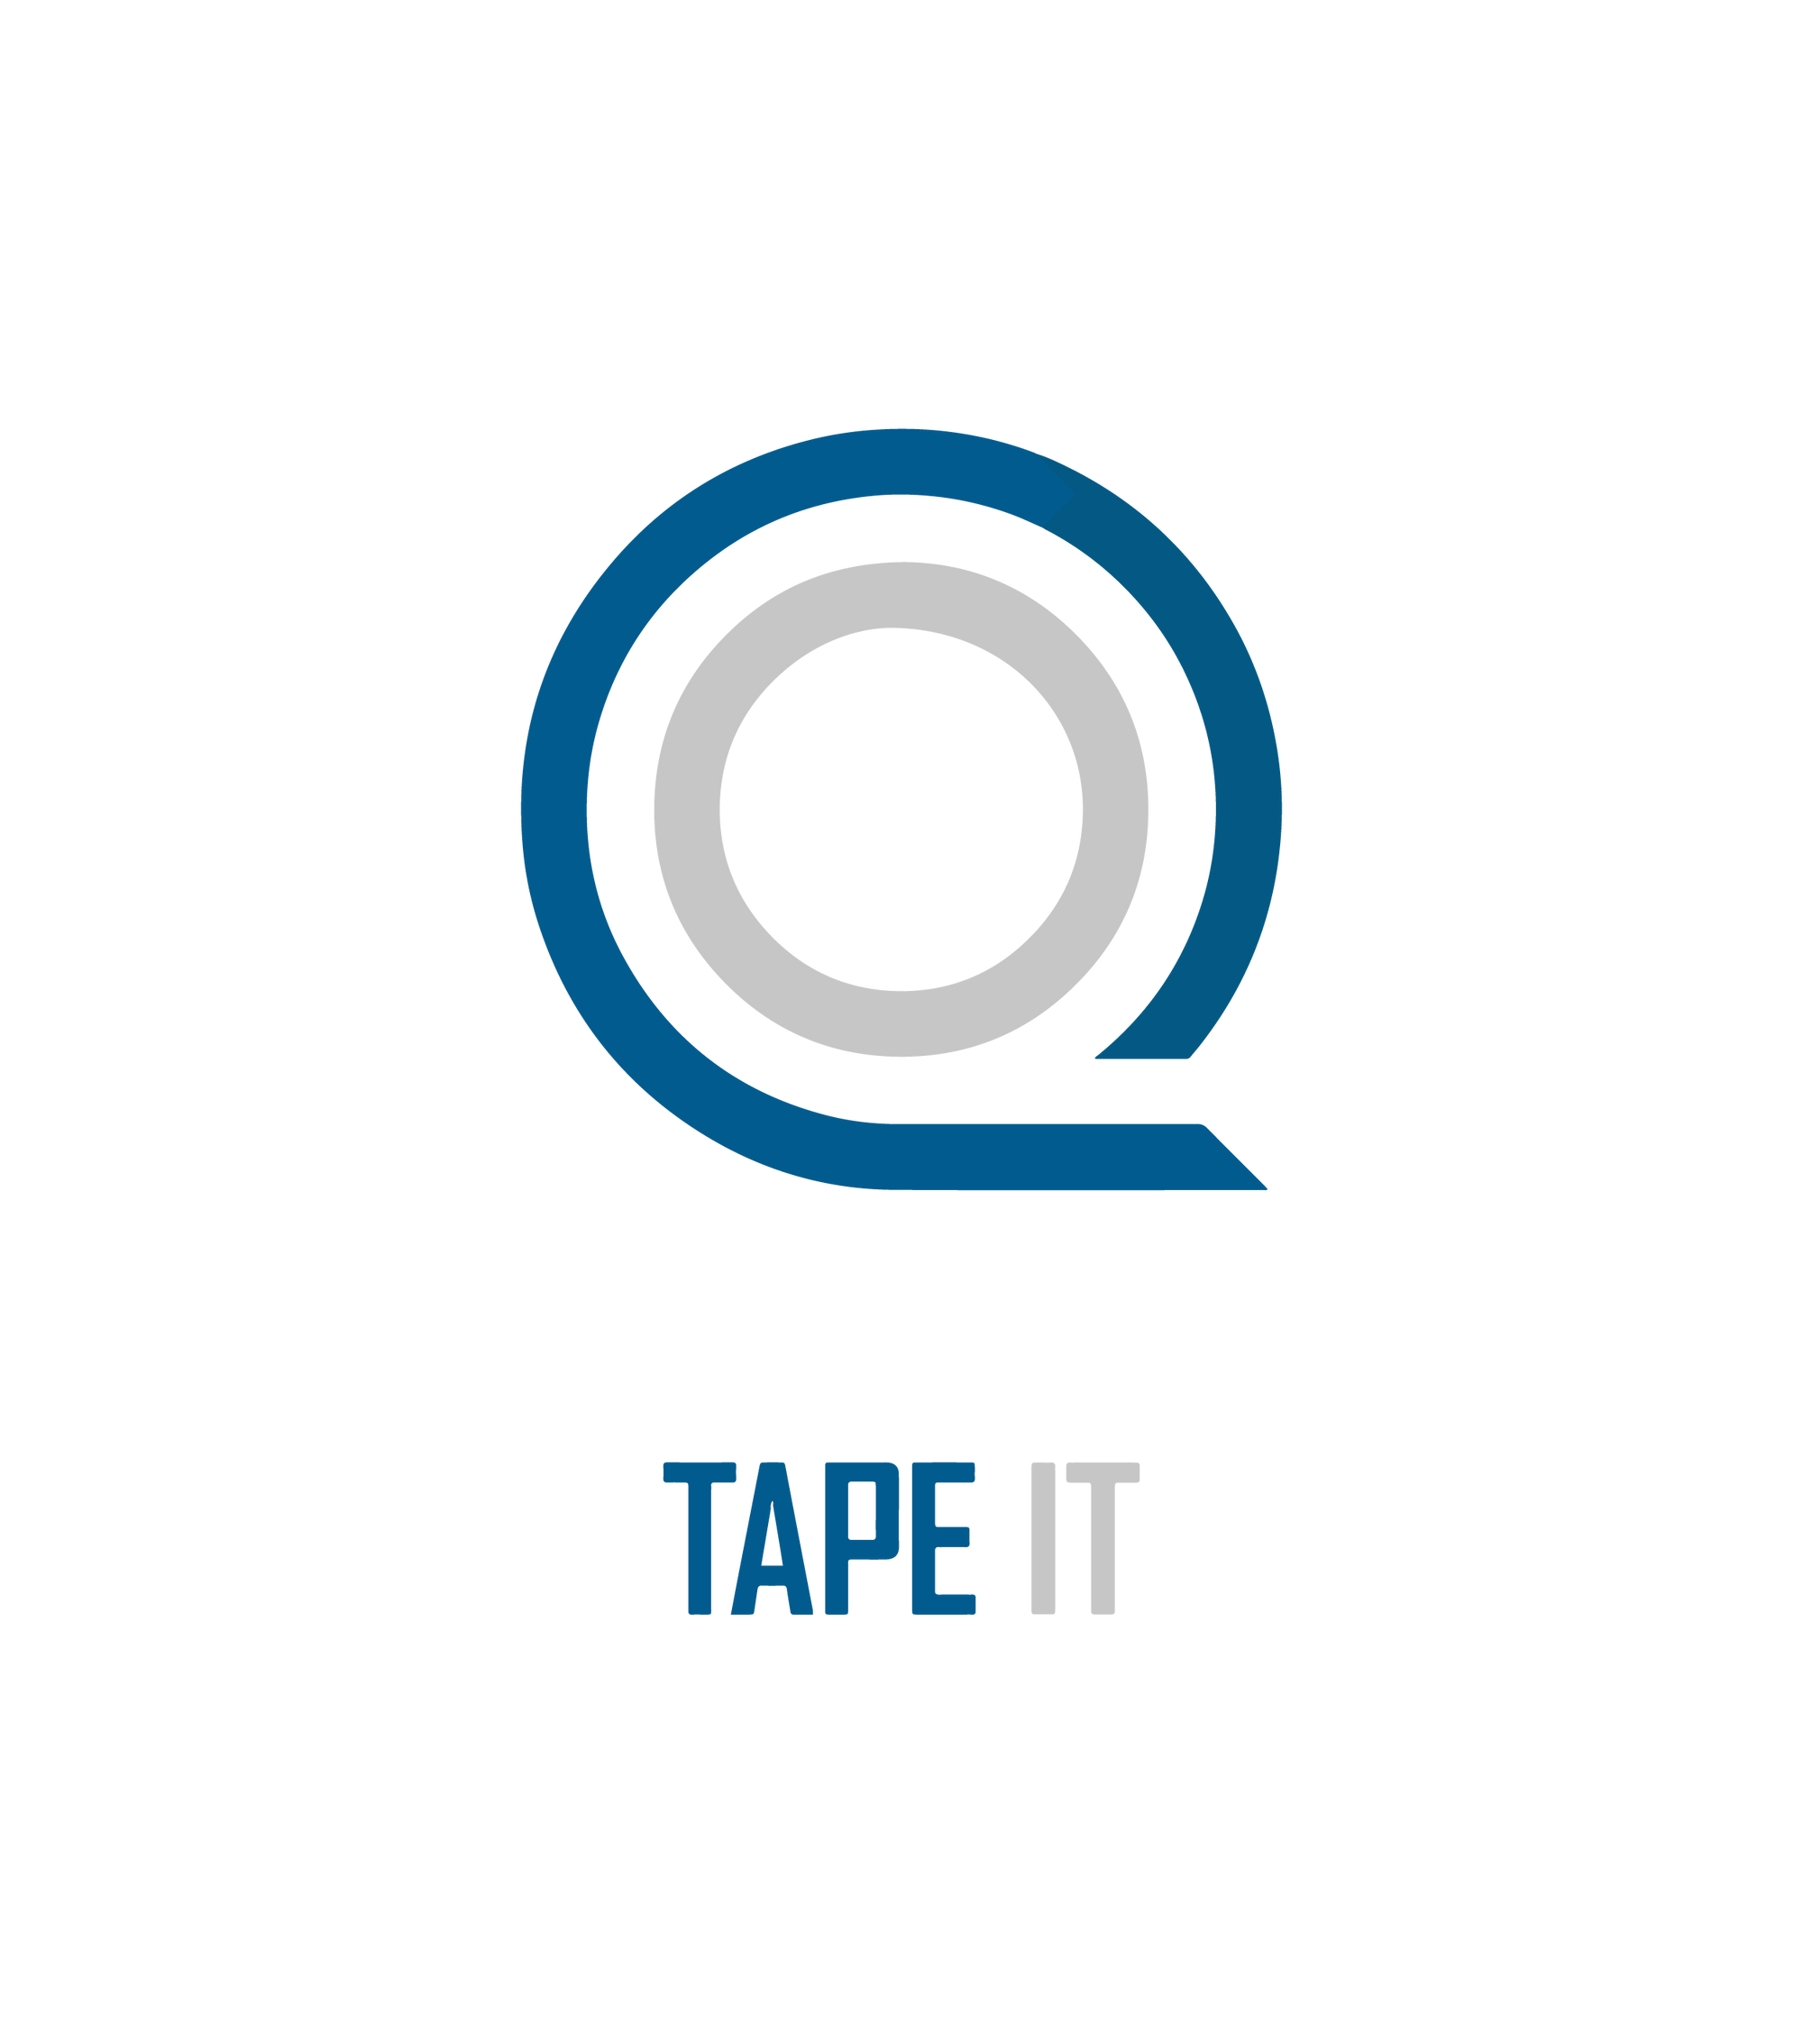 Cargo Packaging icon for Tape It - Cargo Packaging specialise in all types of tapes. From clear packaging tape, printed tapes, fillament tape, masking tapes, electrical tapes and machine tapes.